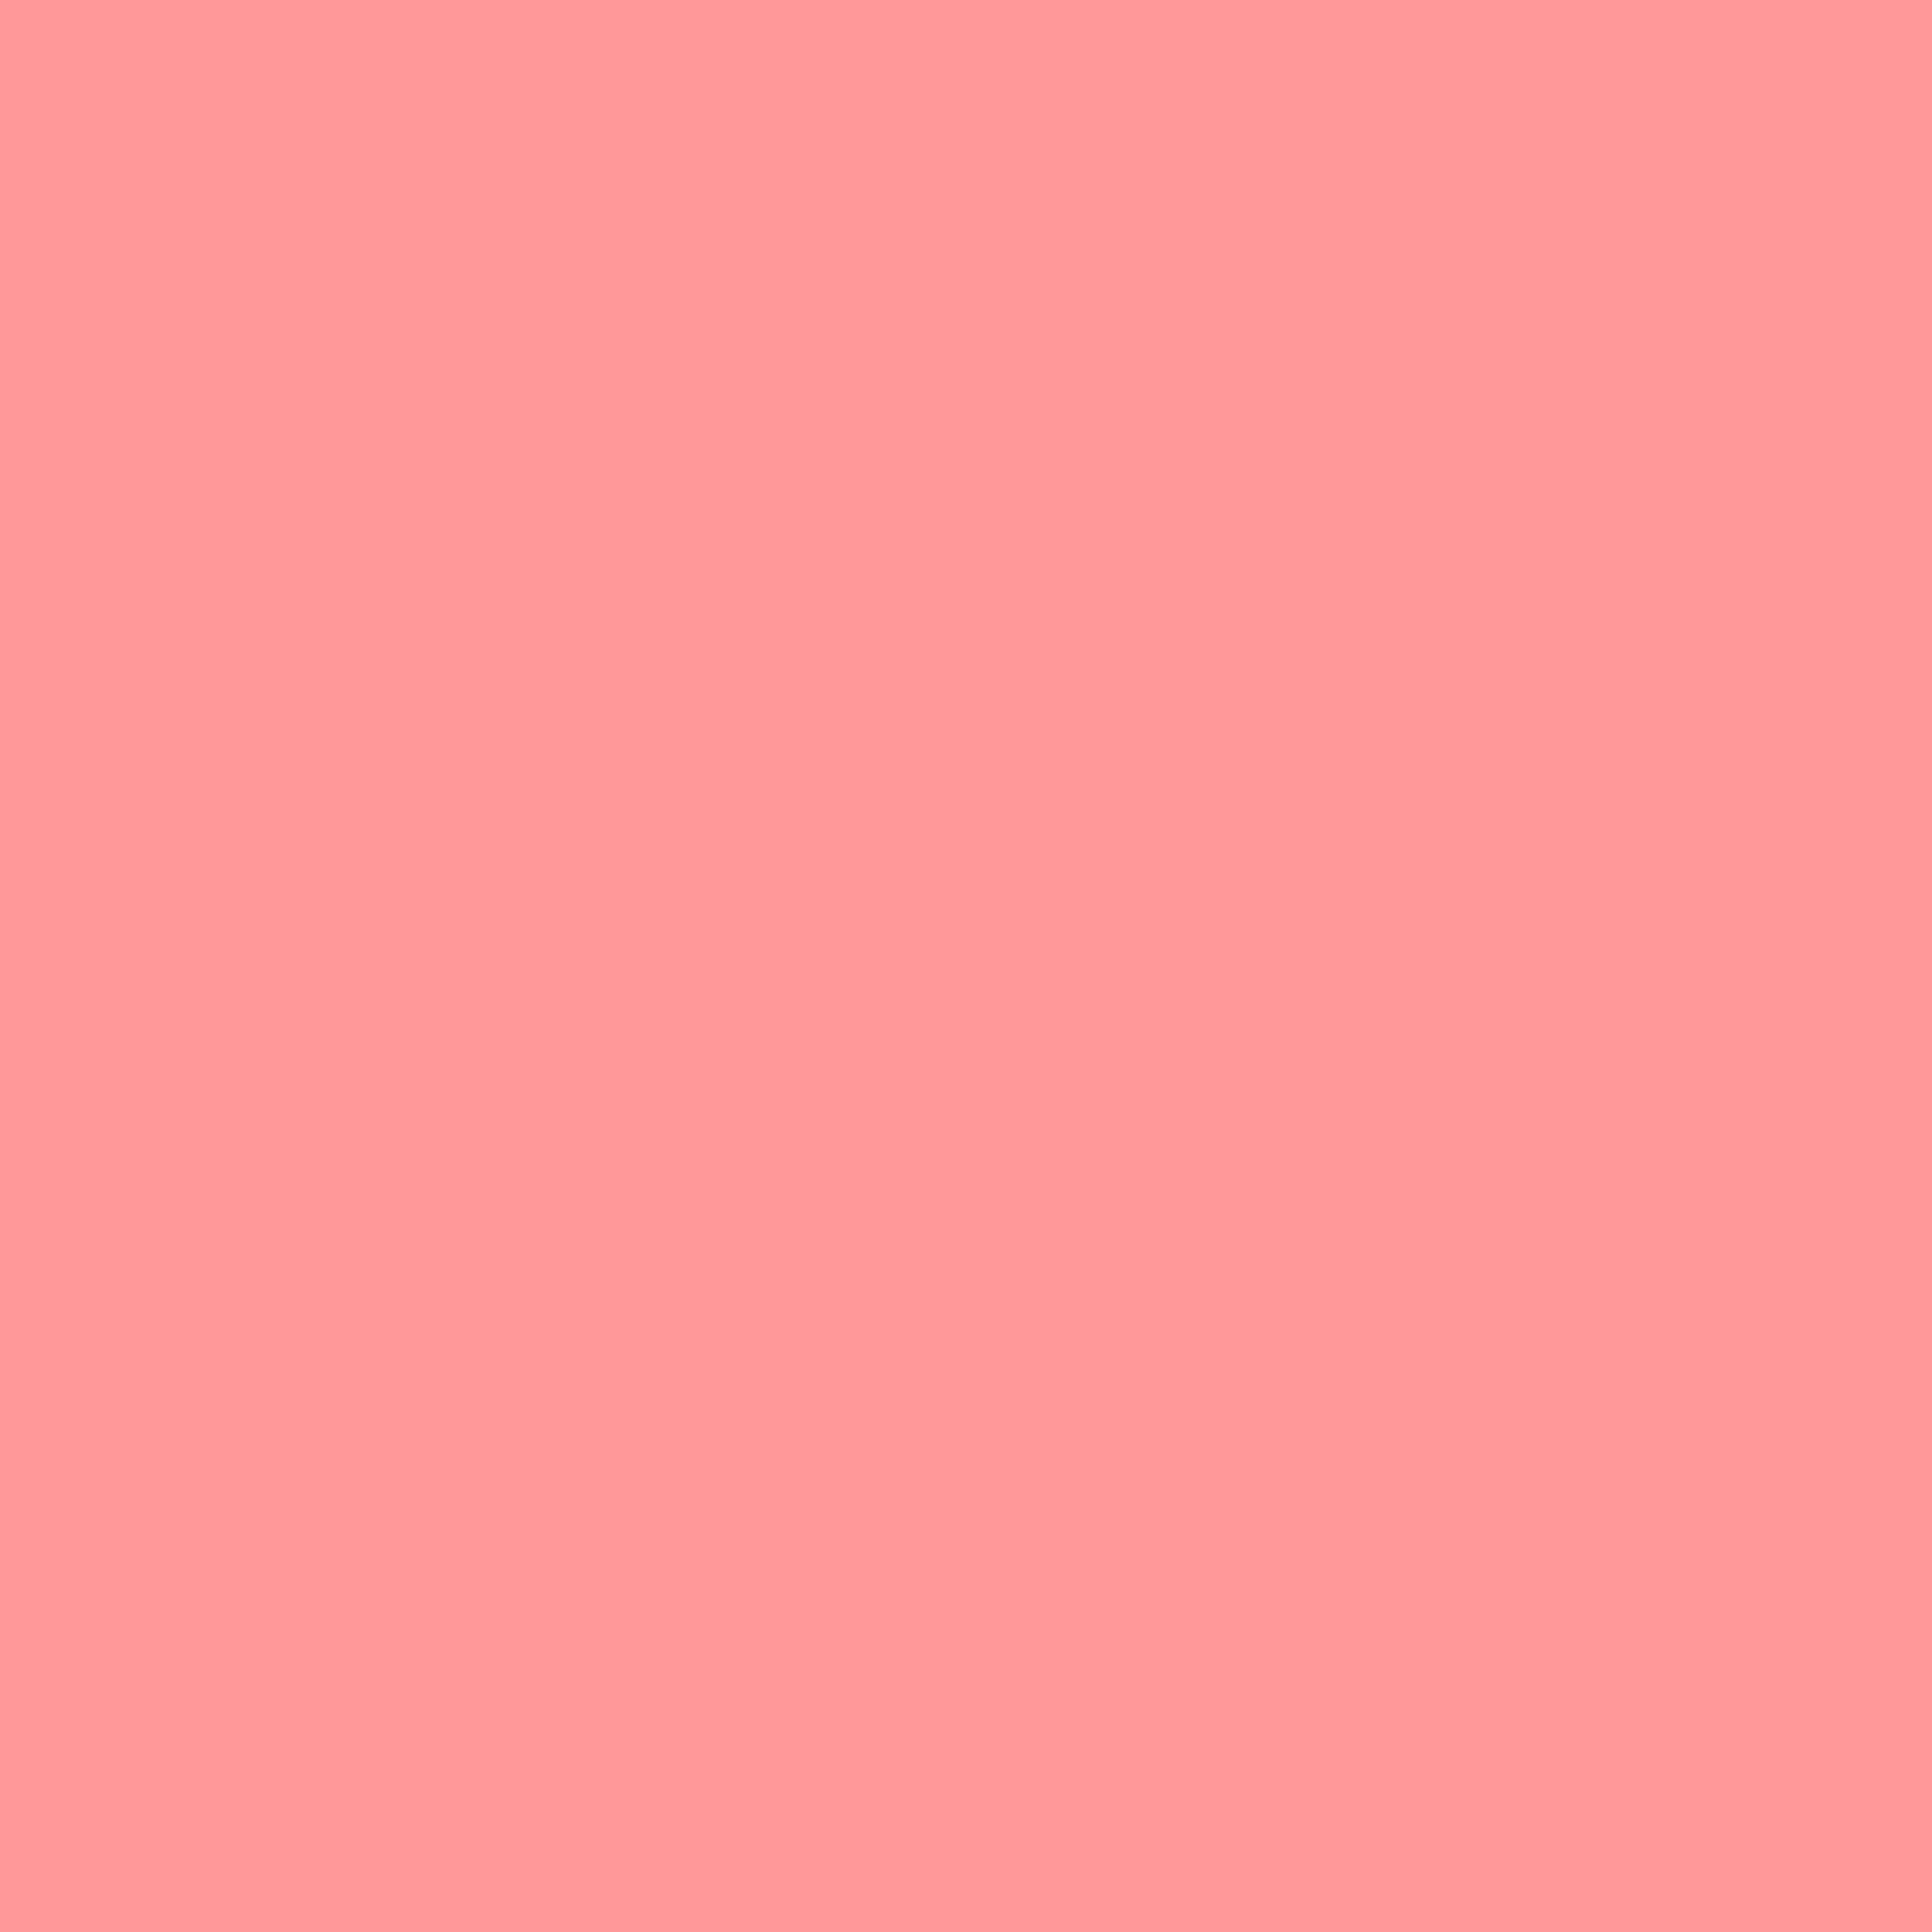 2732x2732 Light Salmon Pink Solid Color Background